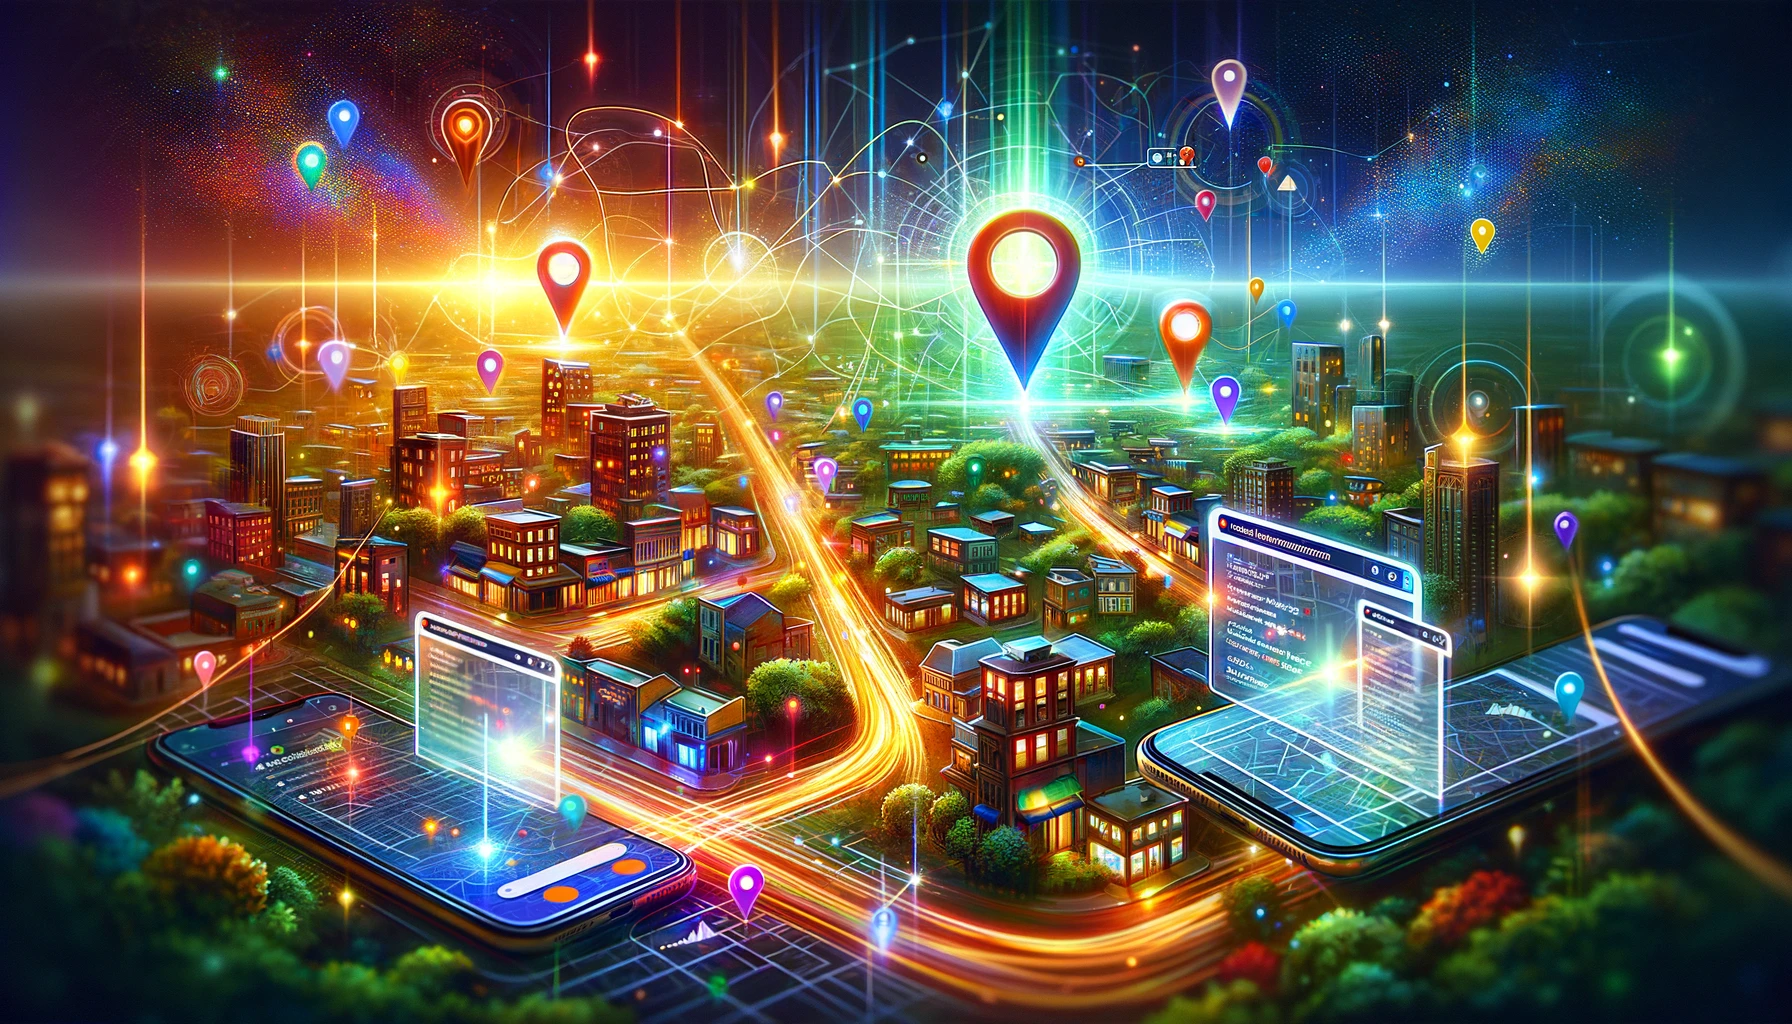  digital art piece illustrating the concept of hyperlocal SEO, focusing on the strategic use of neighborhoods and towns to attract client